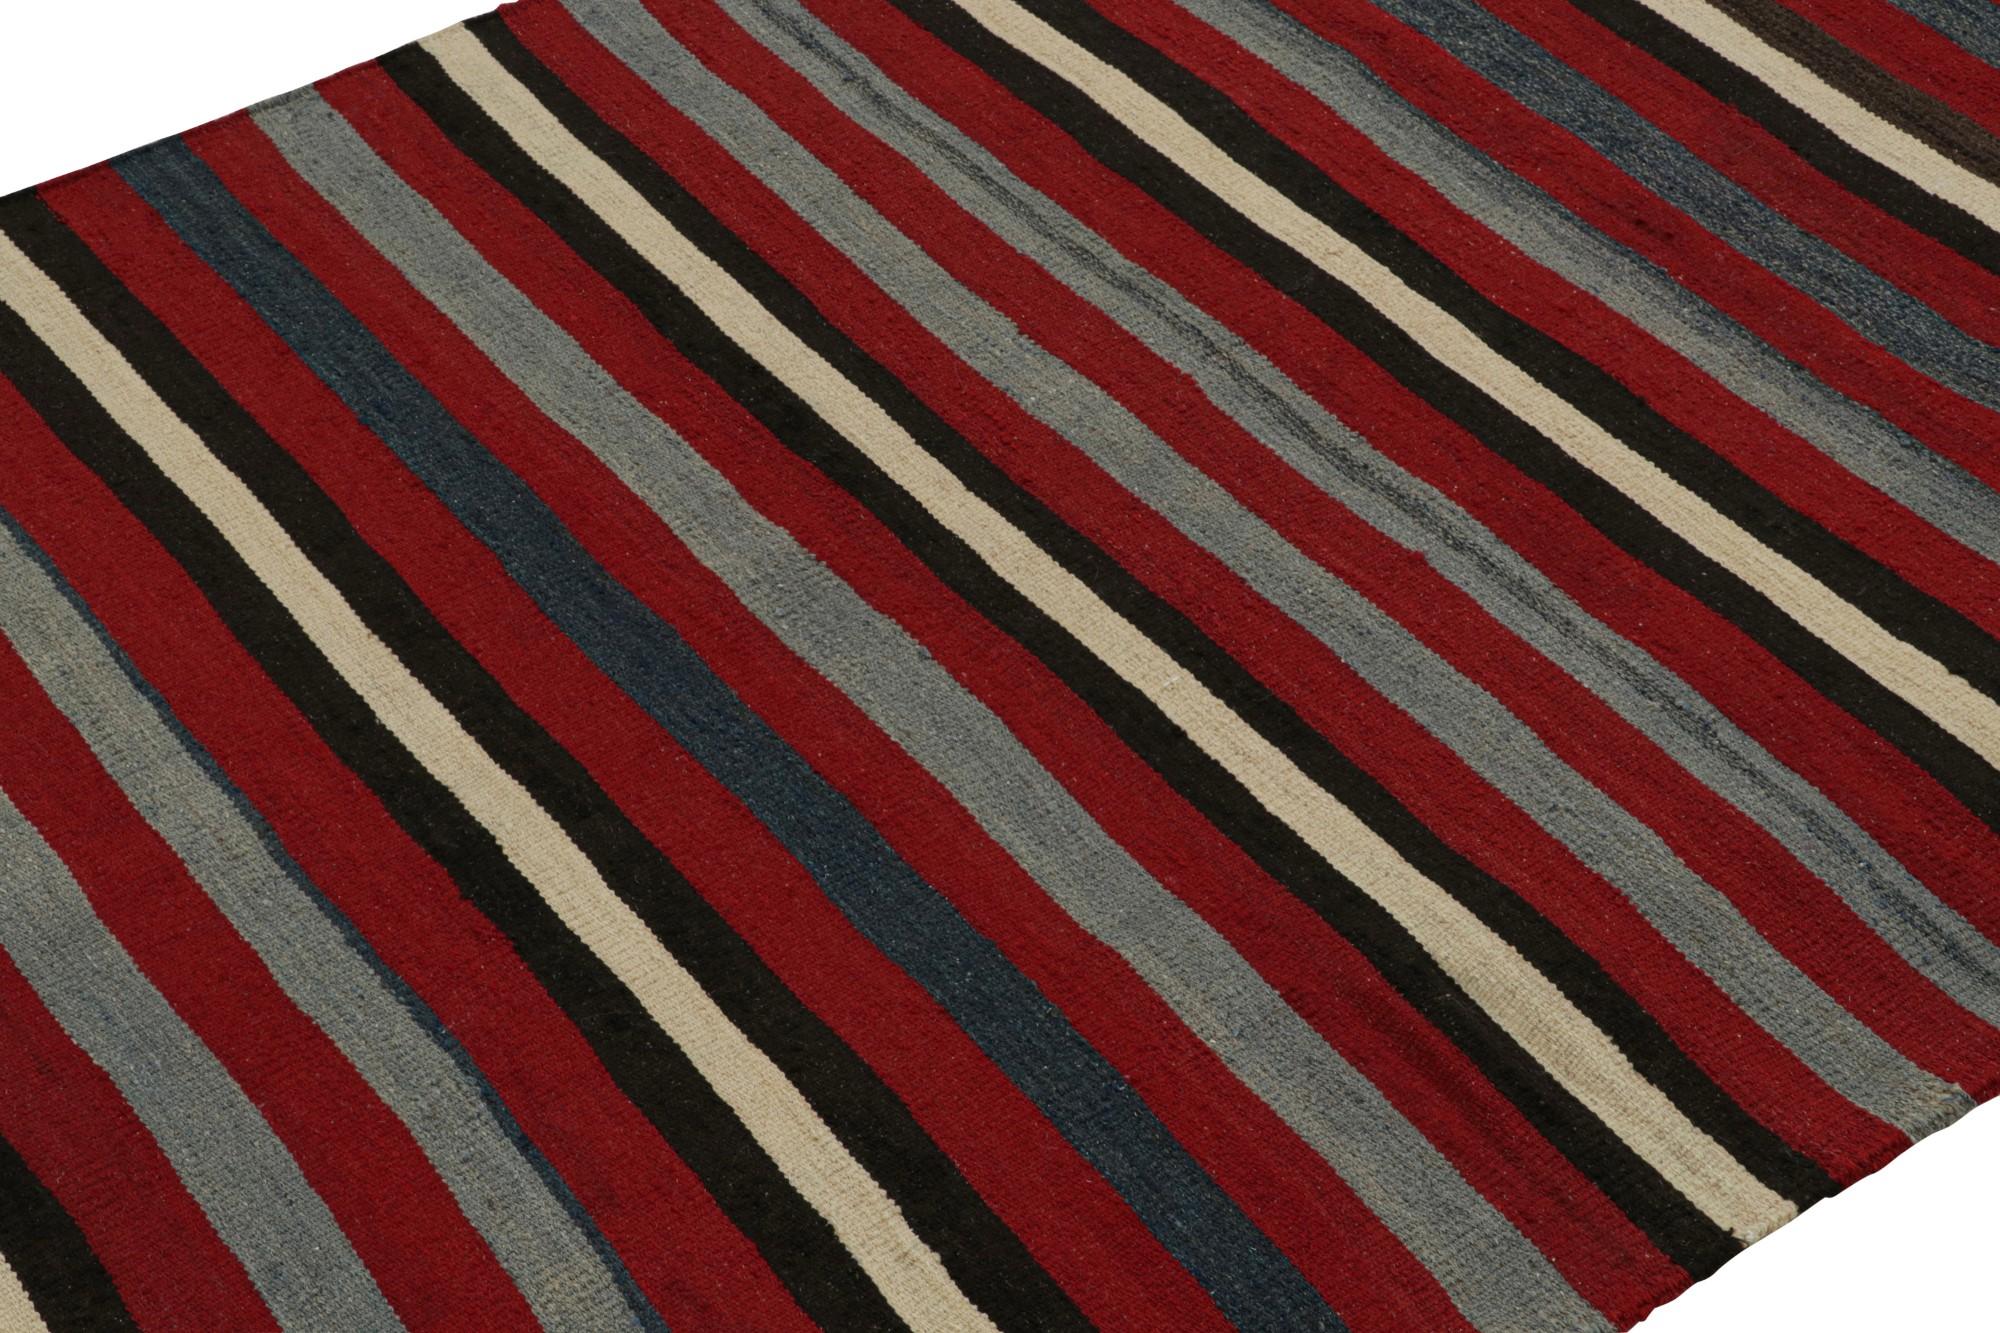 Hand-Knotted Rug & Kilim’s Afghan Tribal Kilim Rug in Red with Geometric Striped Patterns For Sale